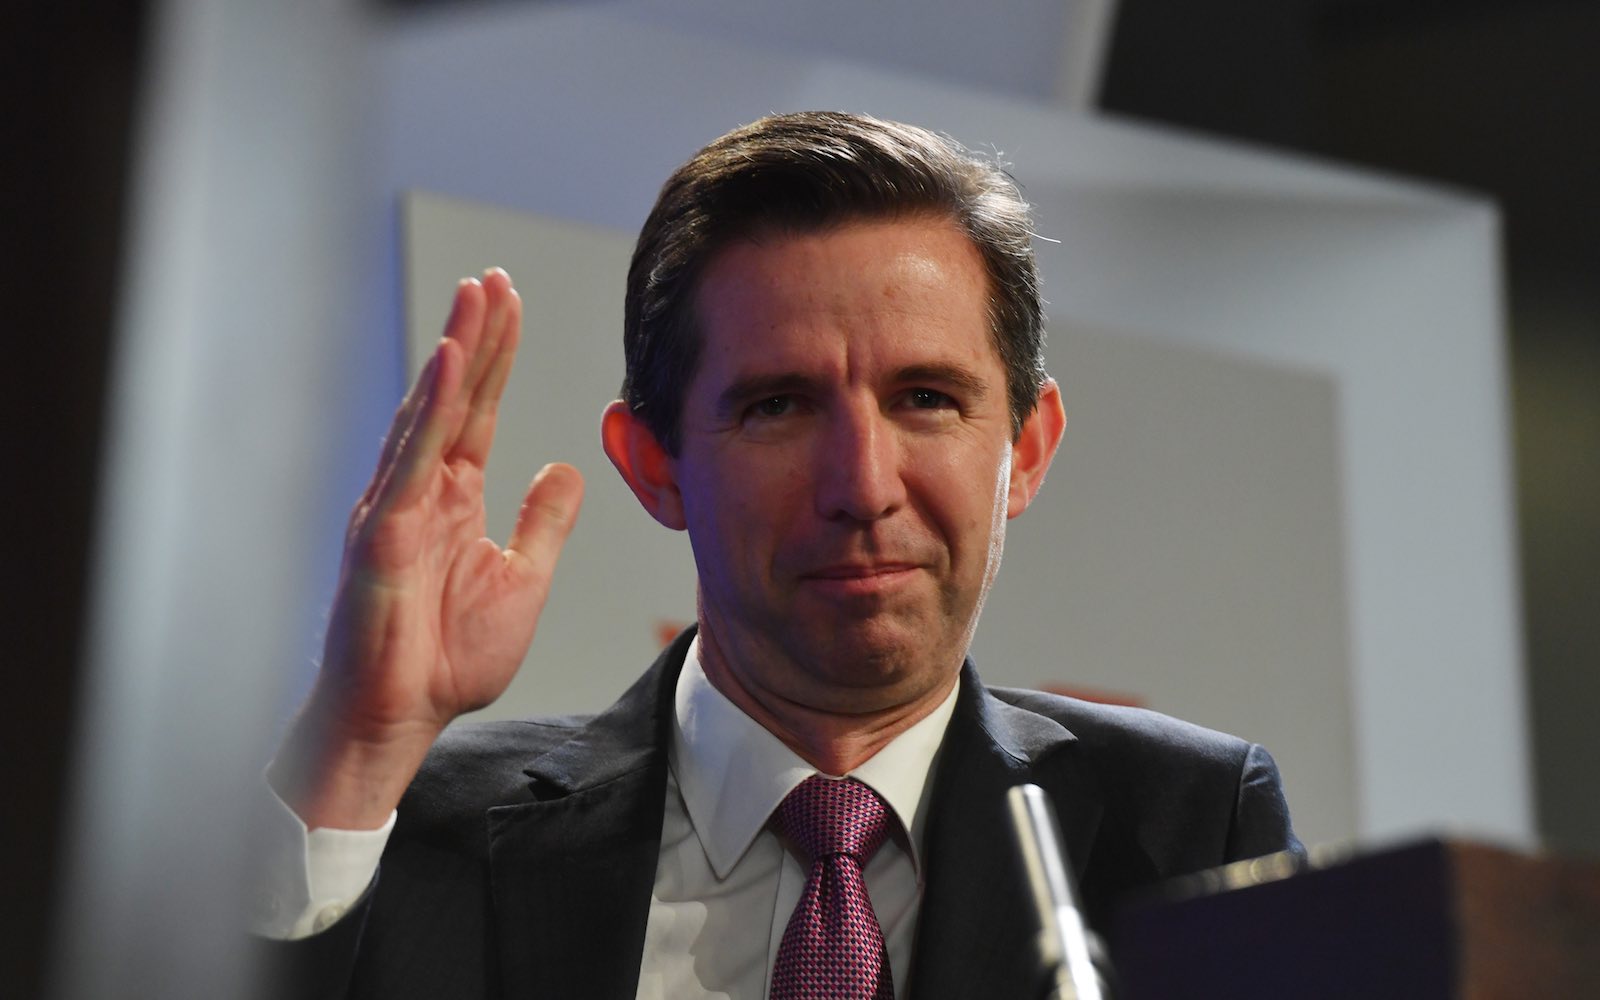 Australia’s Minister for Trade, Tourism and Investment Simon Birmingham at the National Press Club, 17 June 2020 in Canberra (Sam Mooy/Getty Images)